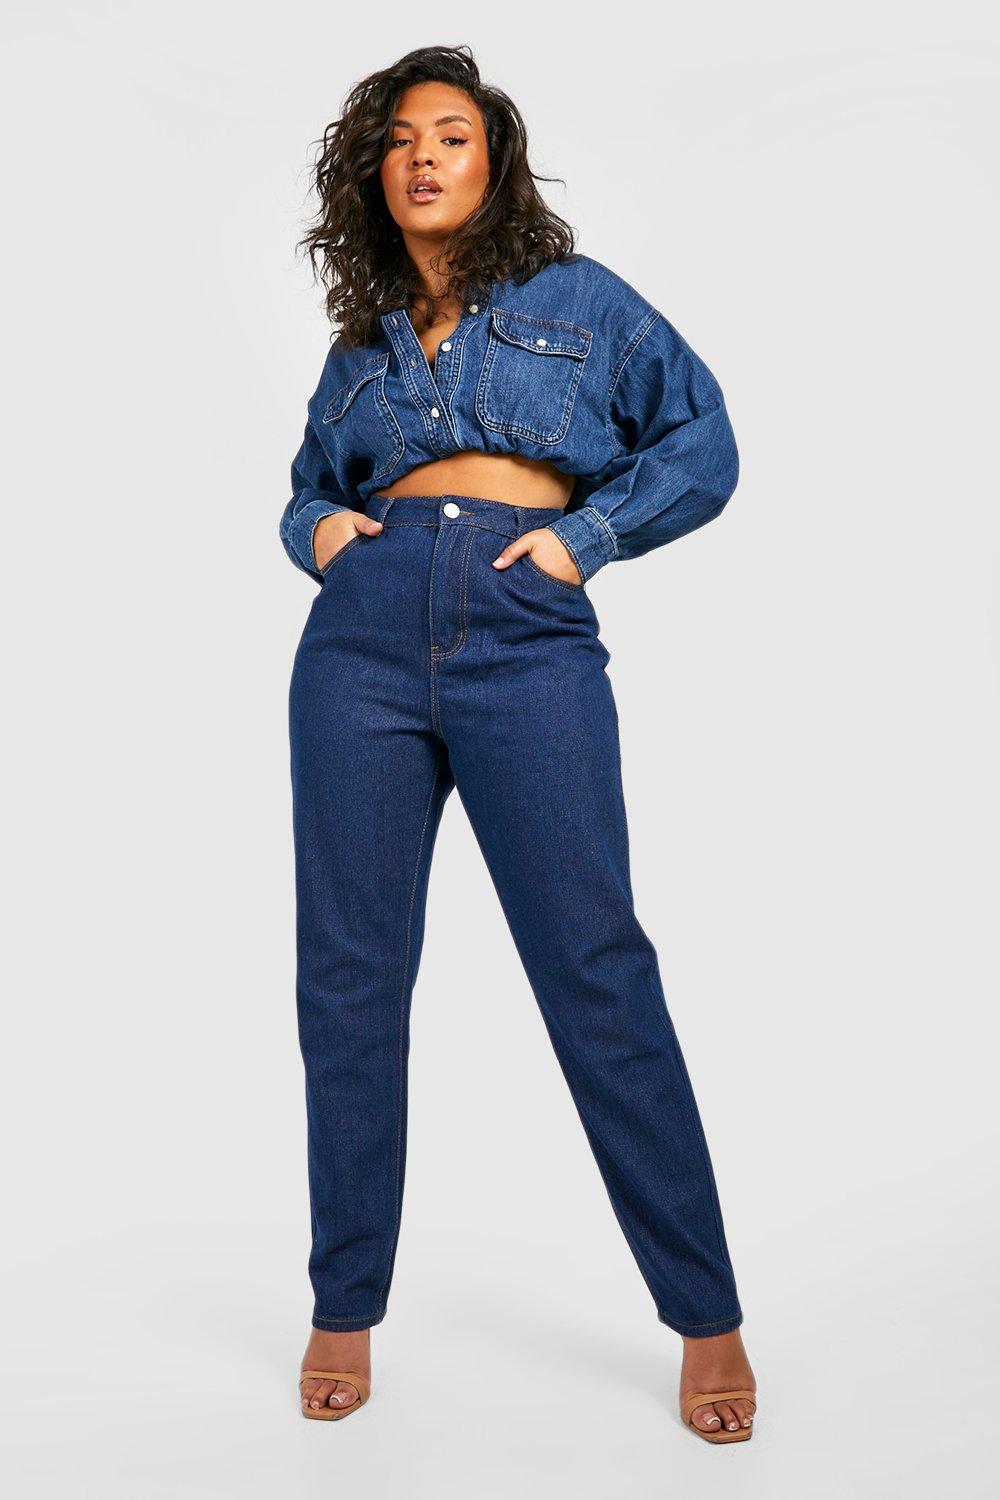 Plus Size High Rise Mom Jeans  High rise mom jeans, Mom jeans, Jeans  outfit women